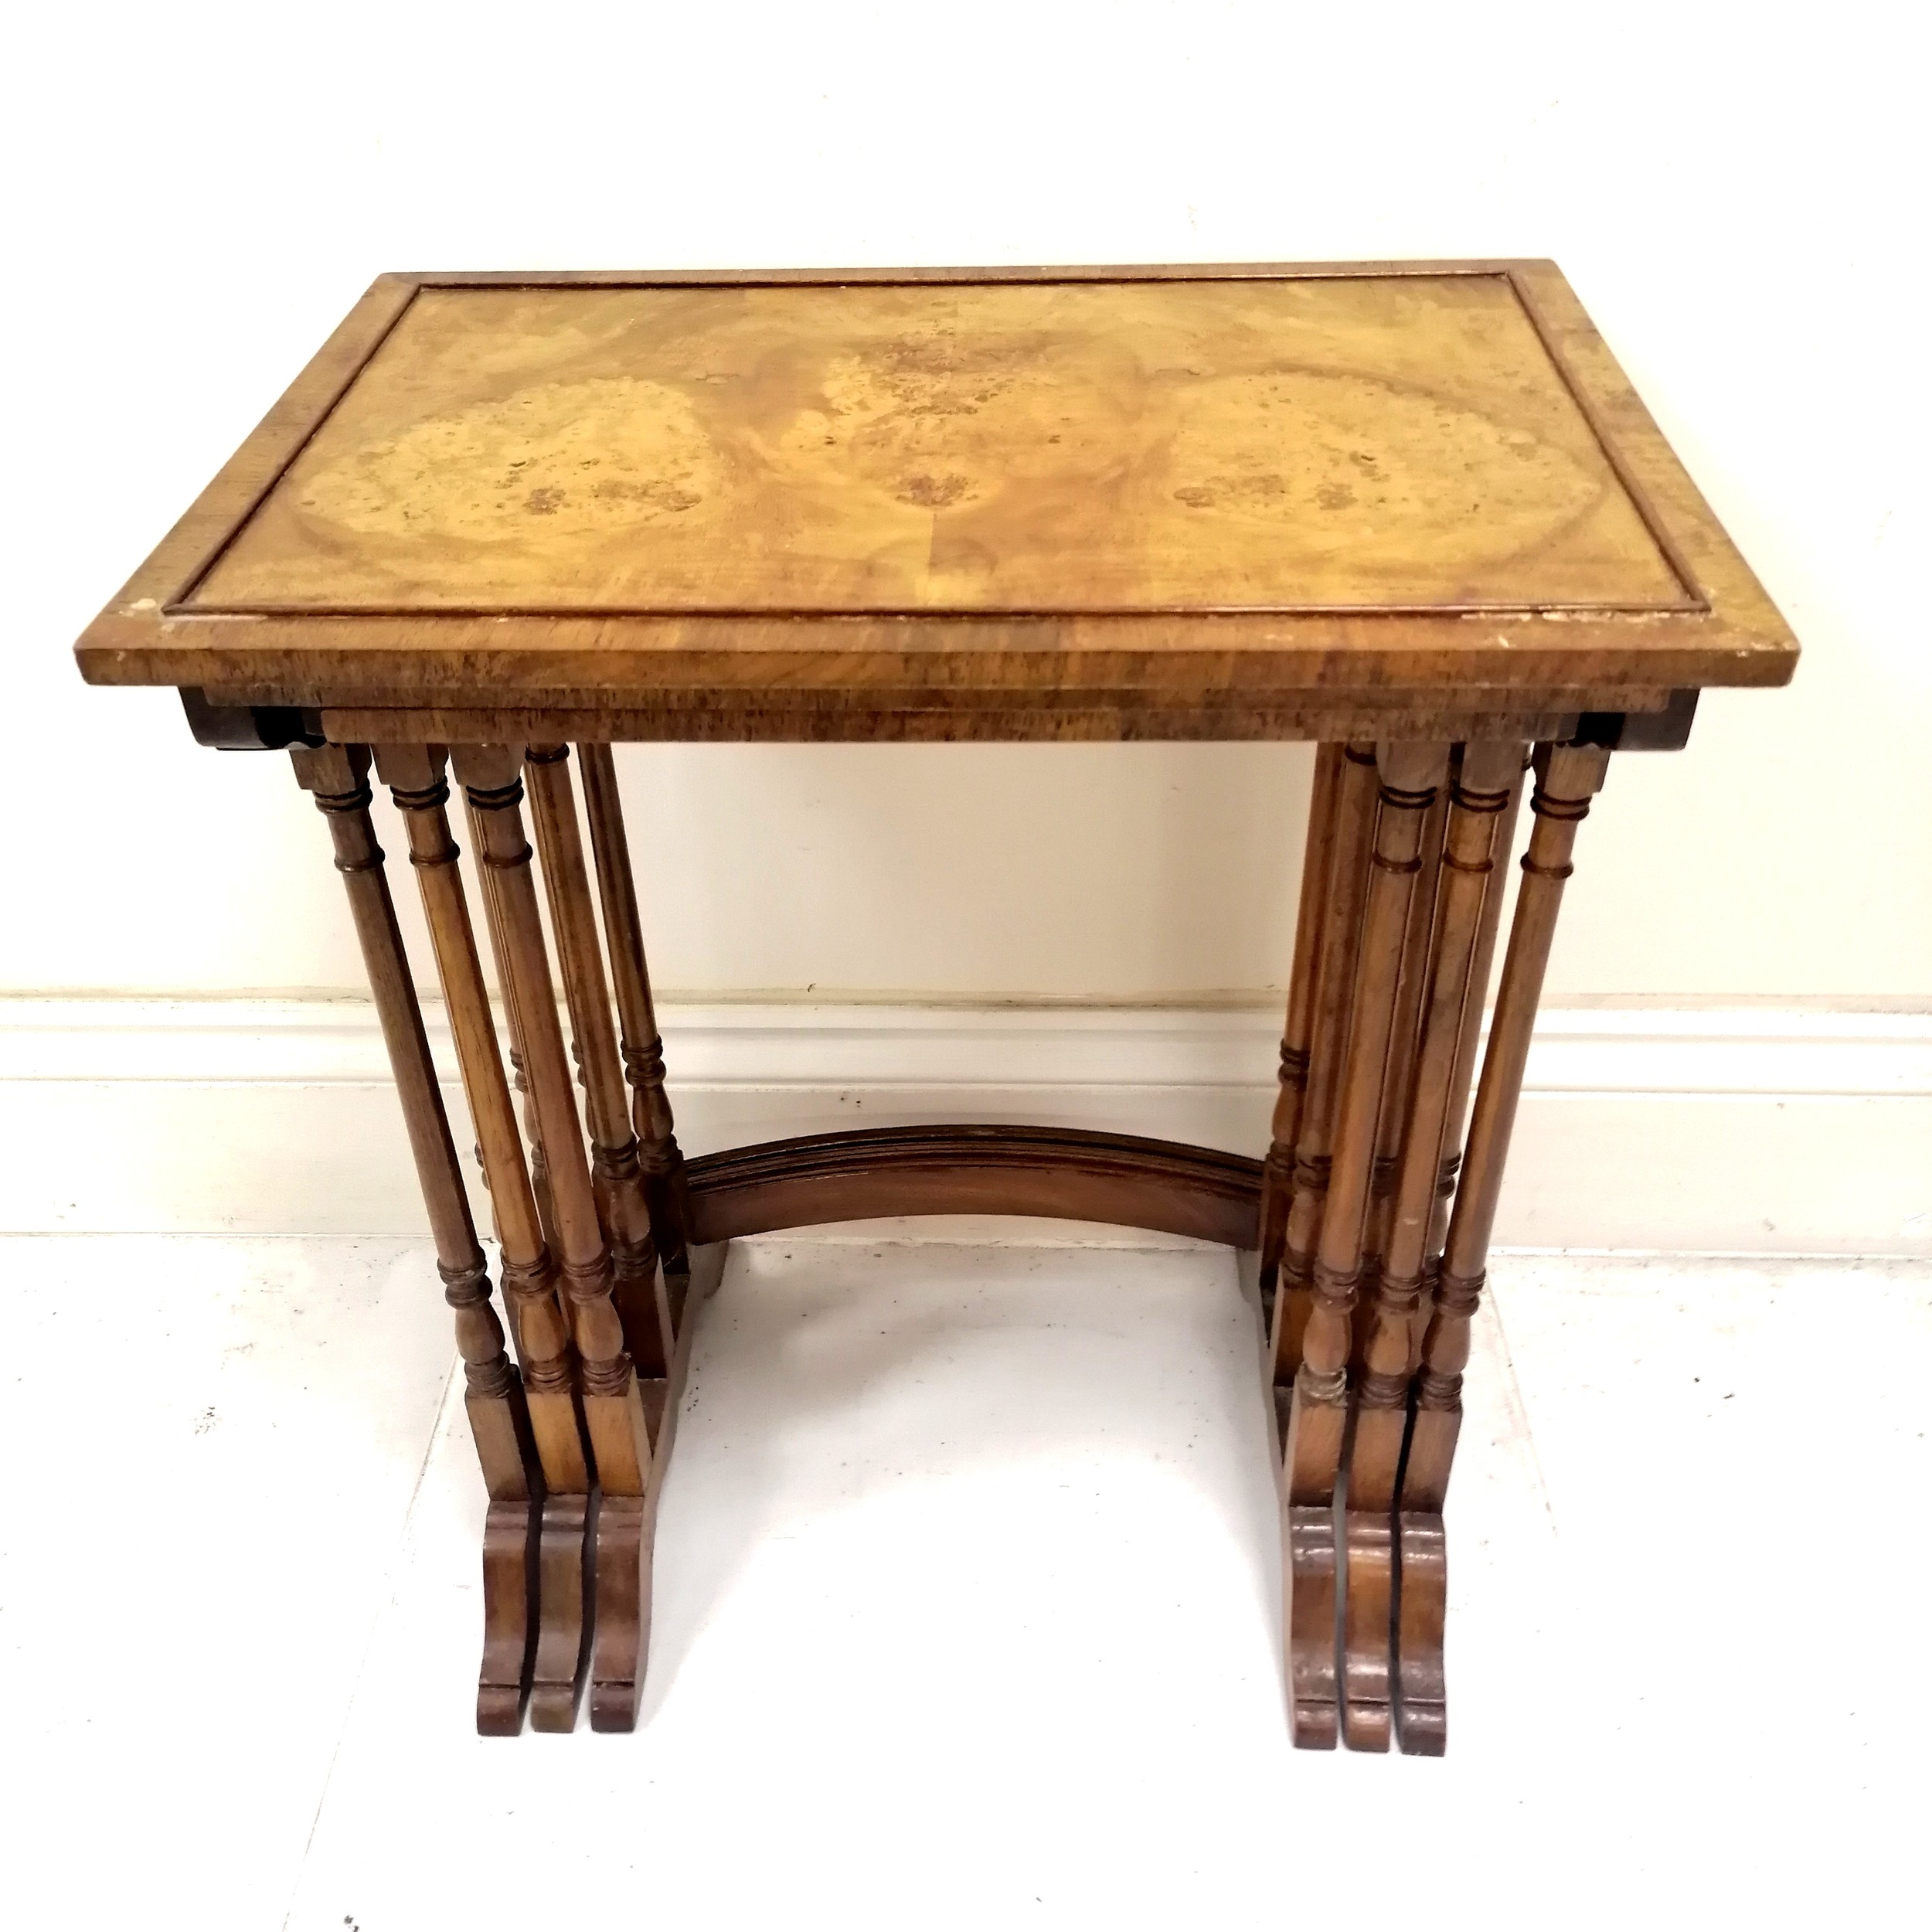 Nest of 3 Walnut reproduction tables - 51cm wide x 35cm deep x 60cm high & in used condition - Image 3 of 5